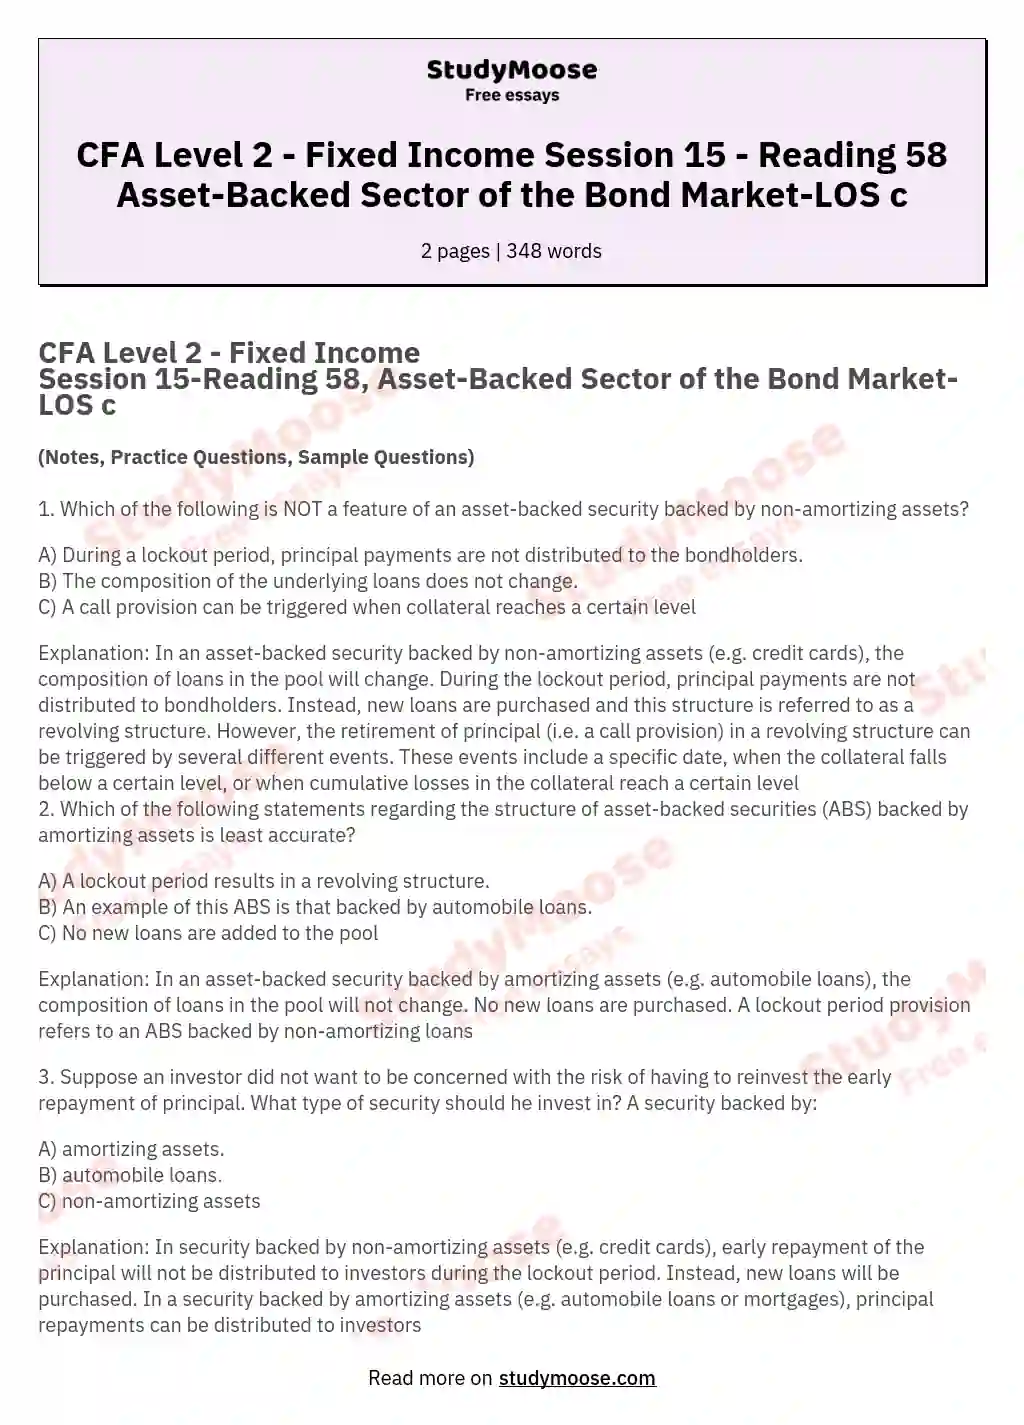 CFA Level 2 - Fixed Income Session 15 - Reading 58 Asset-Backed Sector of the Bond Market-LOS c essay